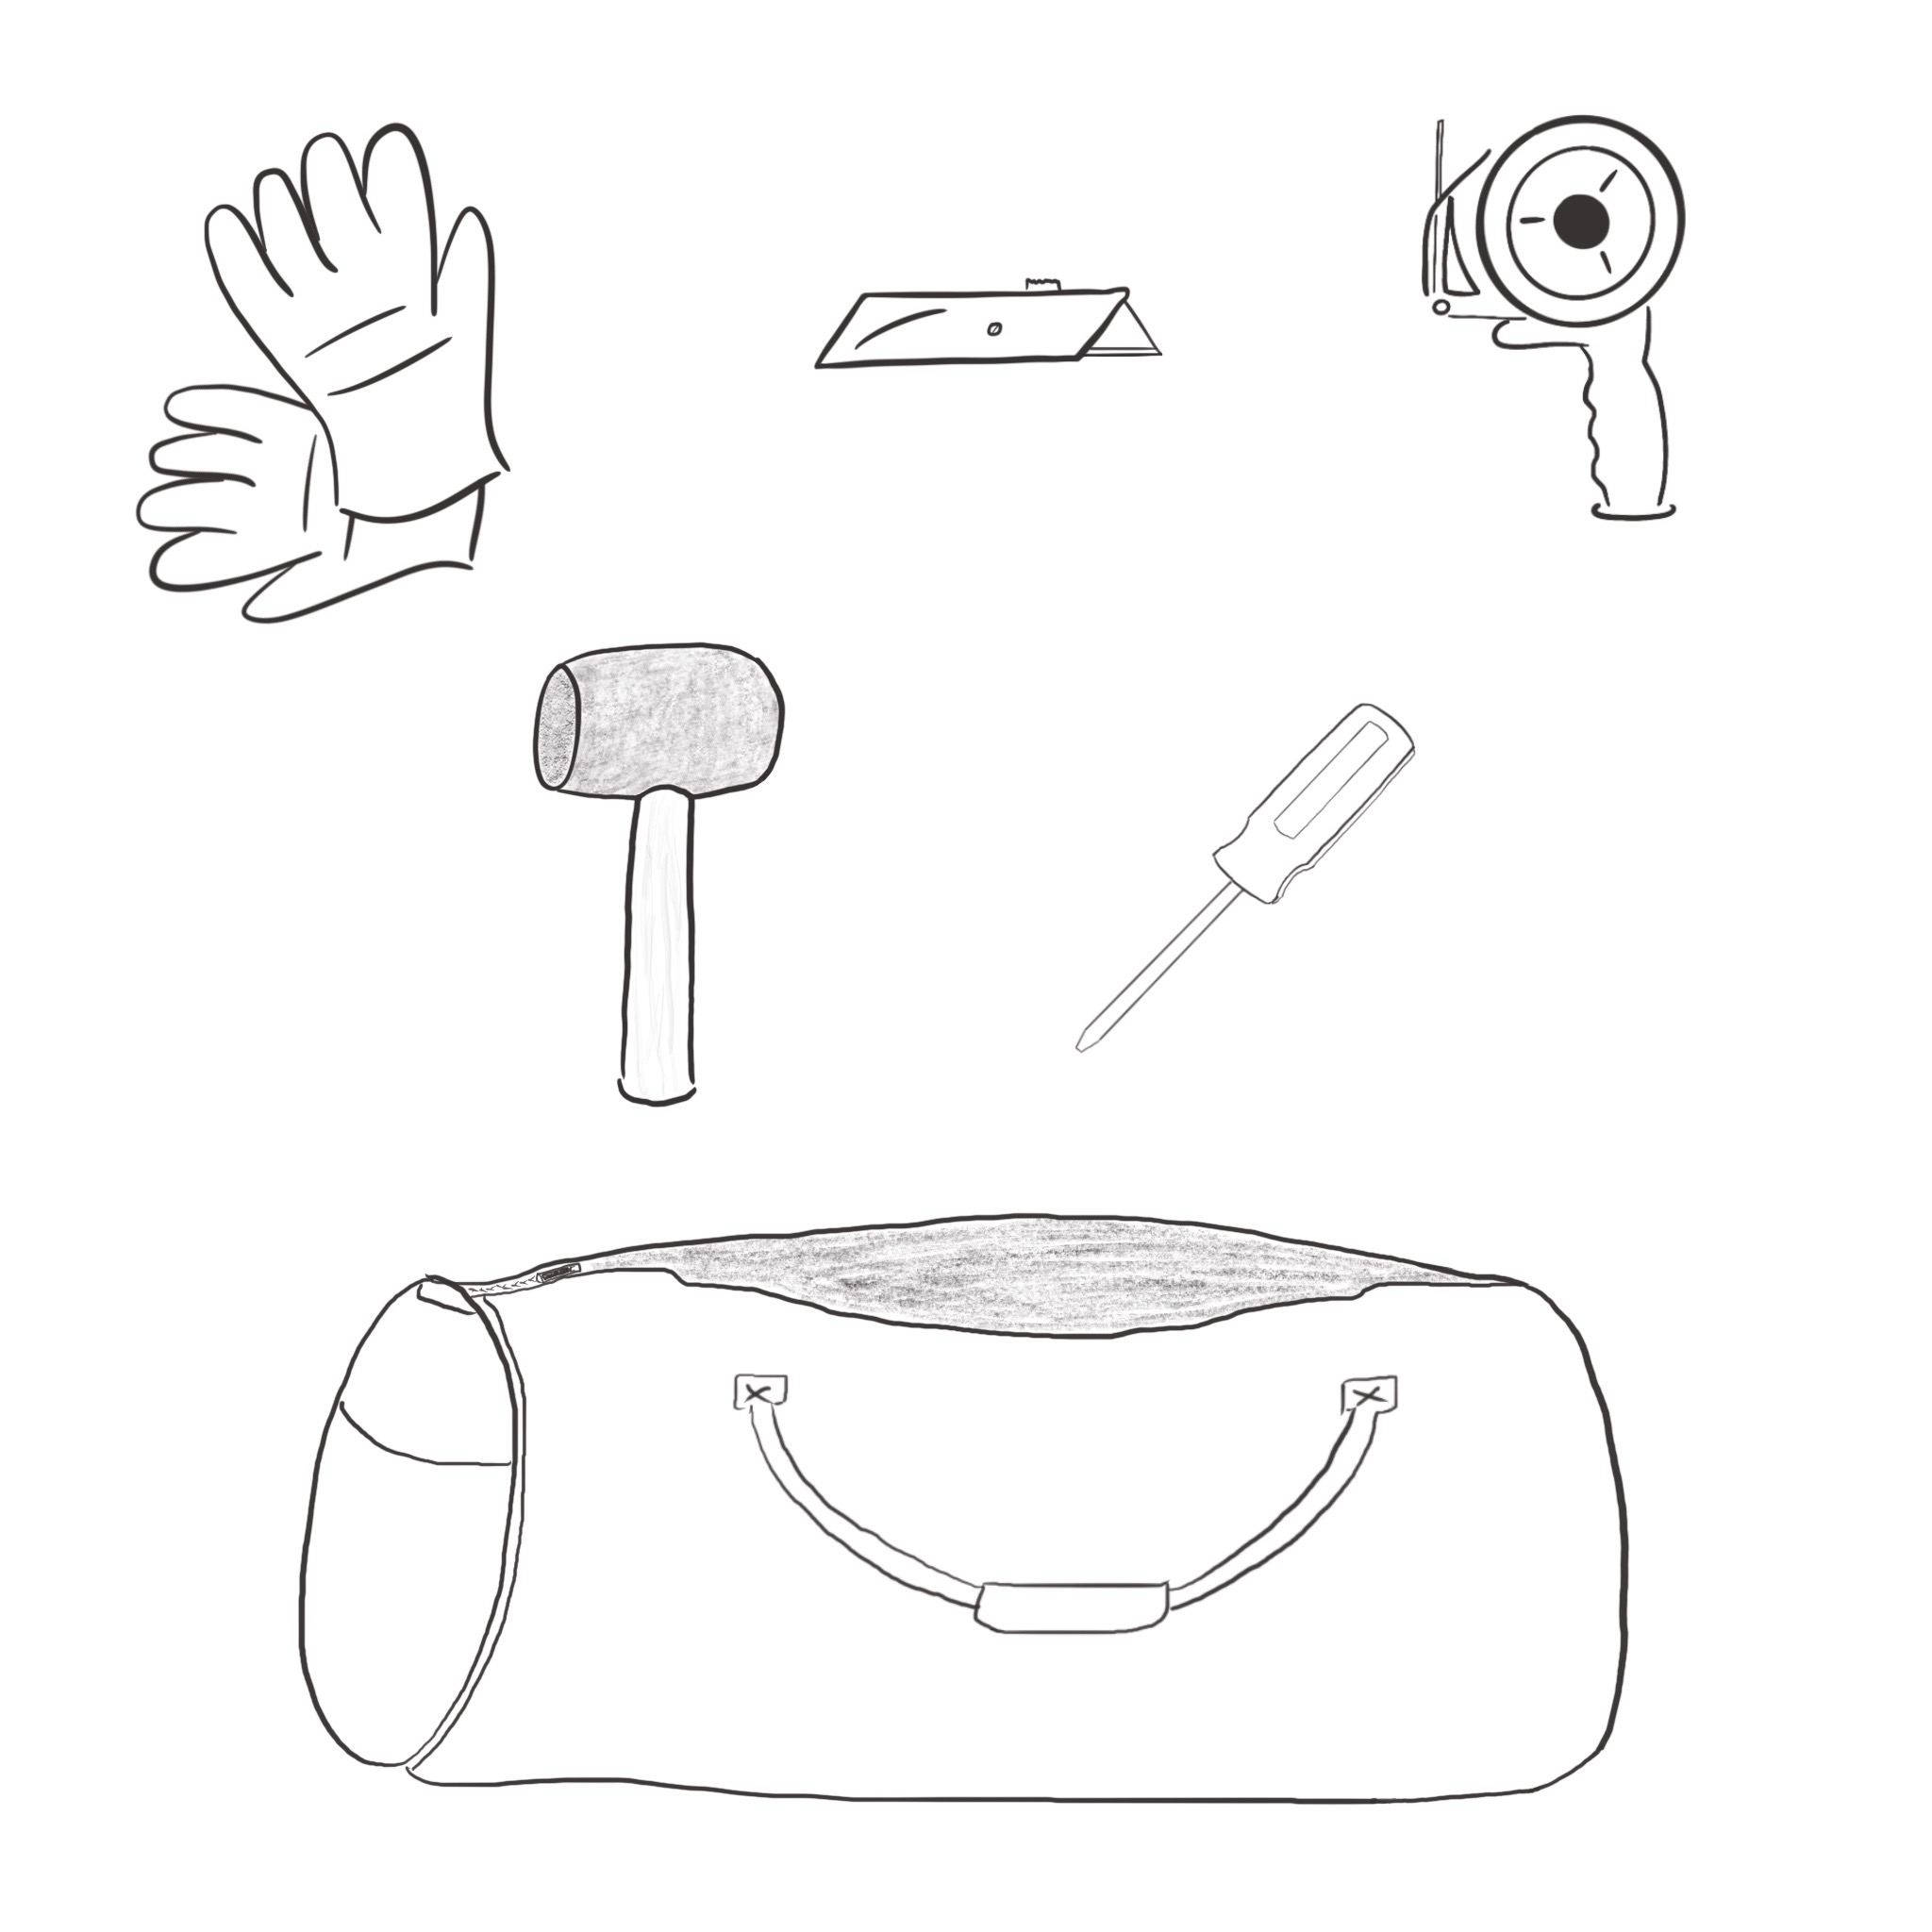 Drawing of a pair of work gloves, utility knife, tape dispenser, rubber mallet, screwdriver, and a duffel bag